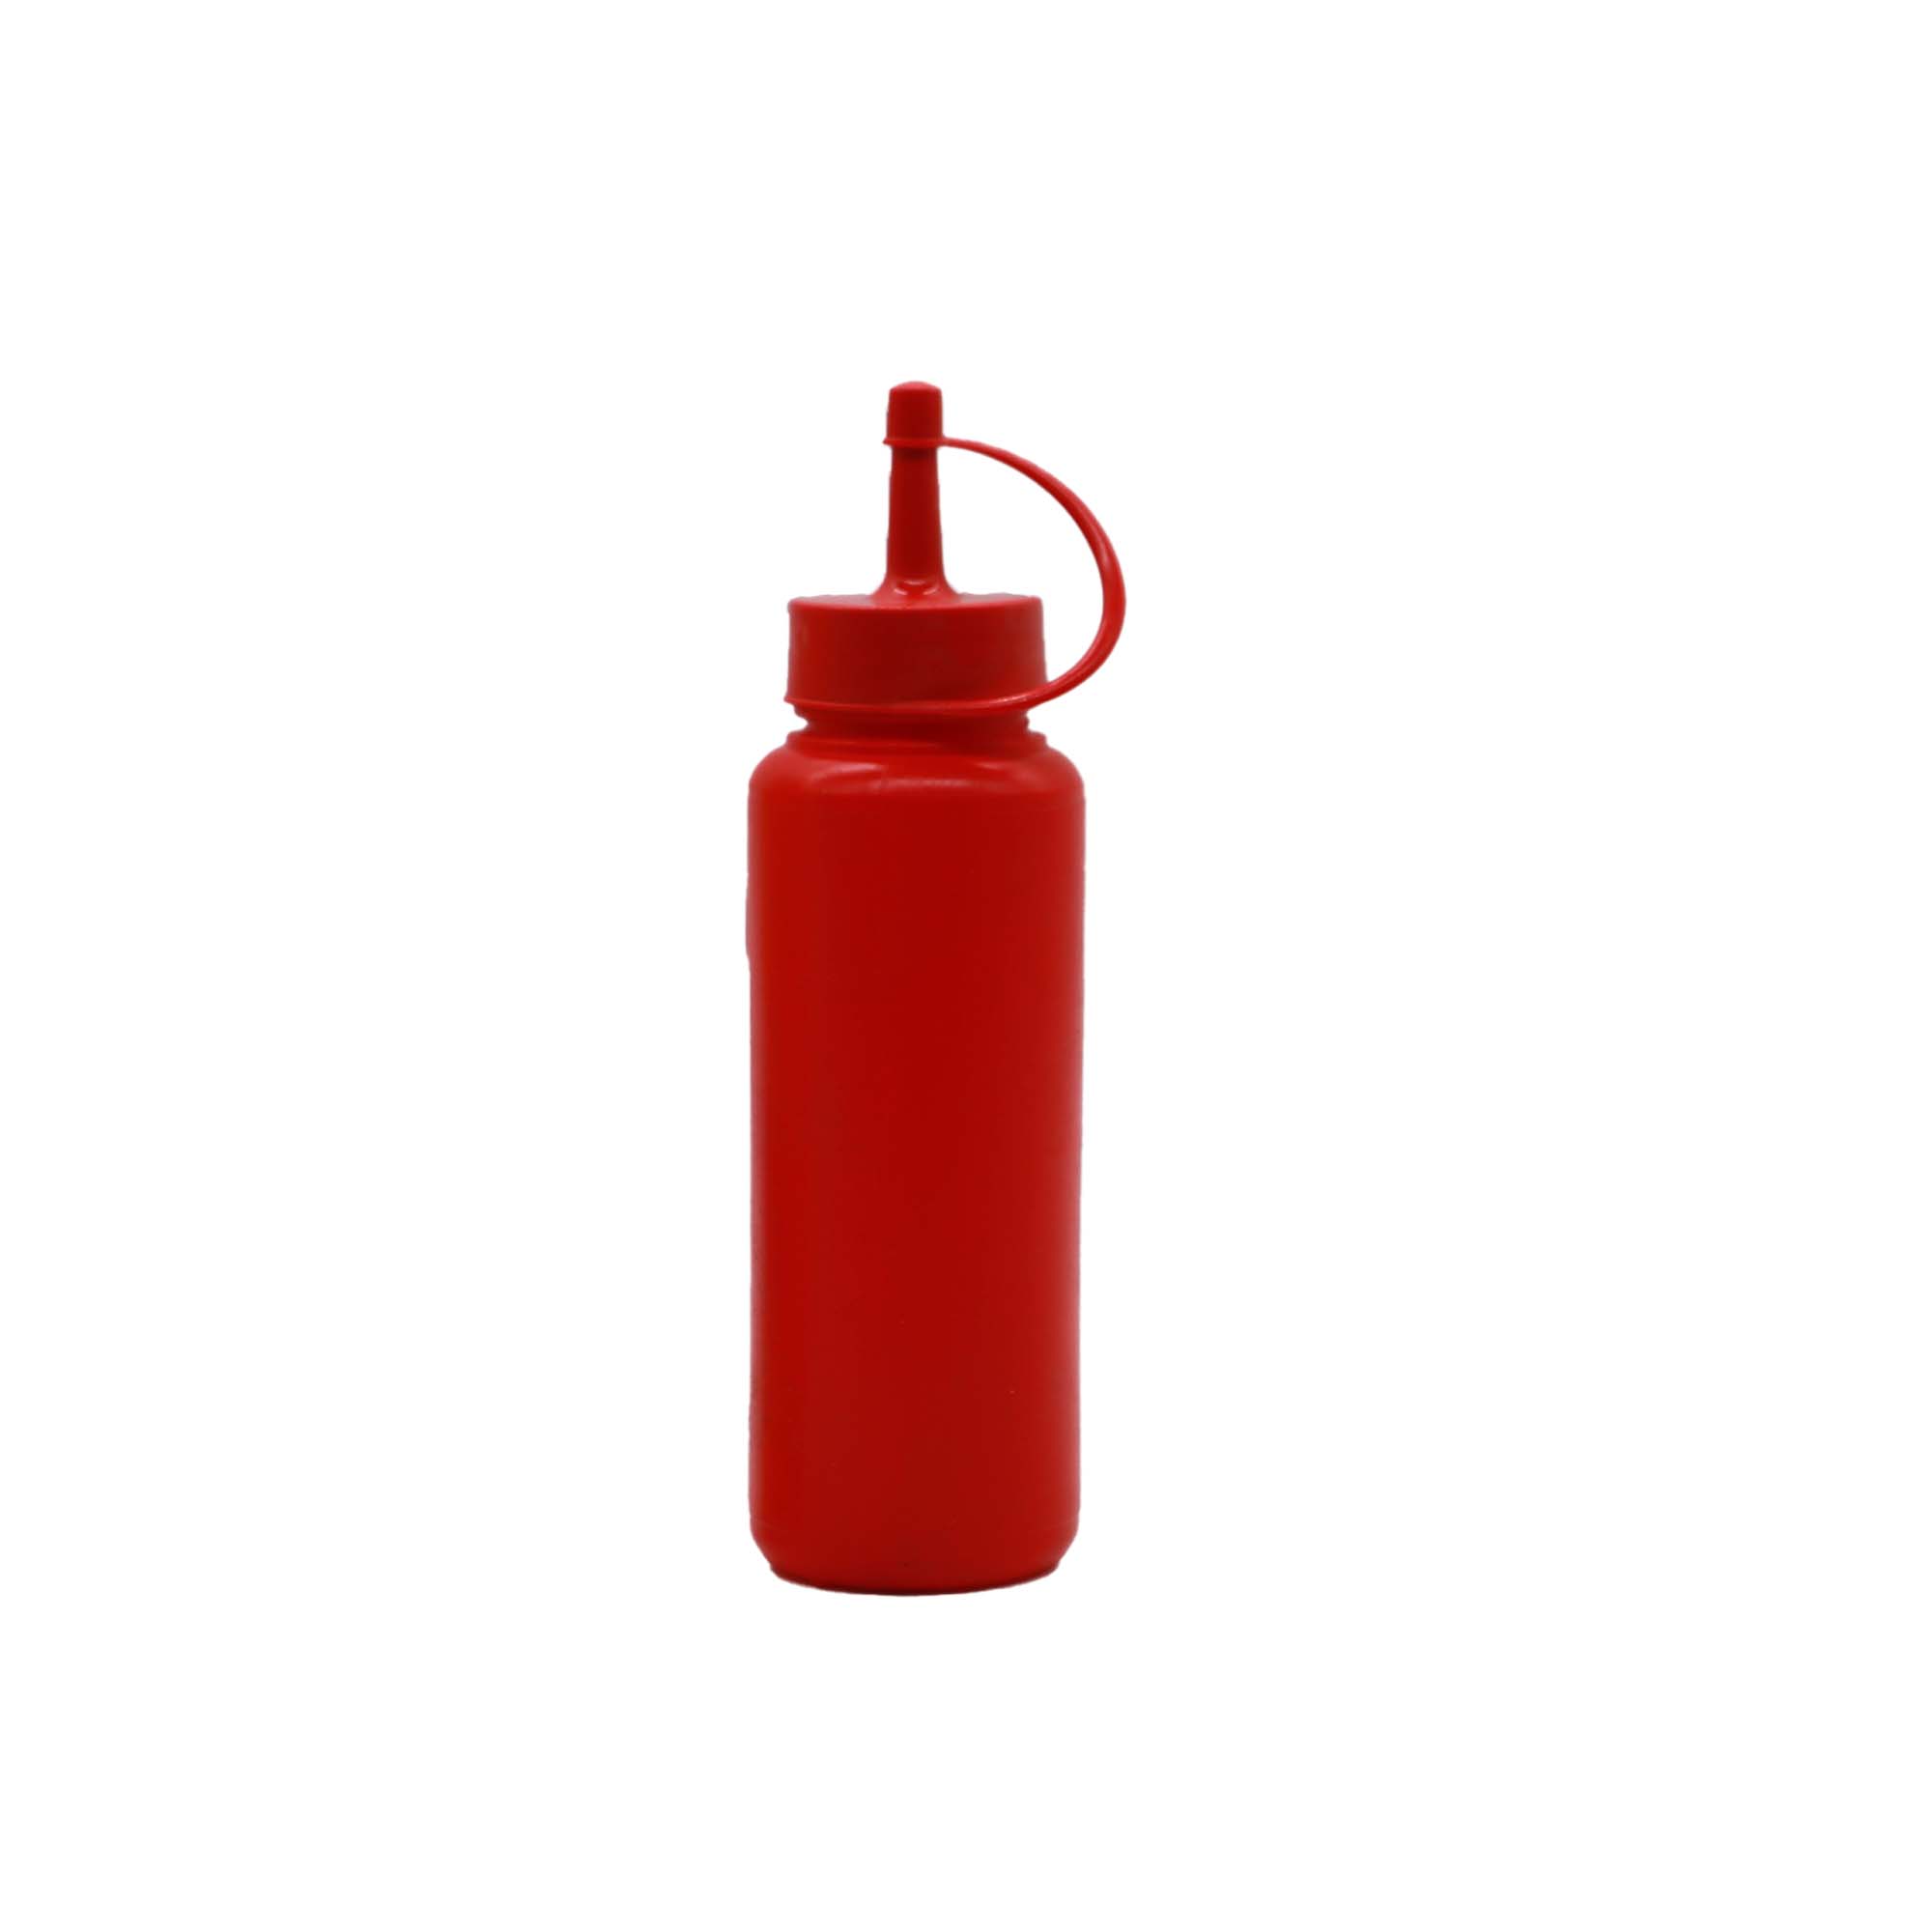 Plastic Squeeze Sauce Bottle 250ml Red Each 12108